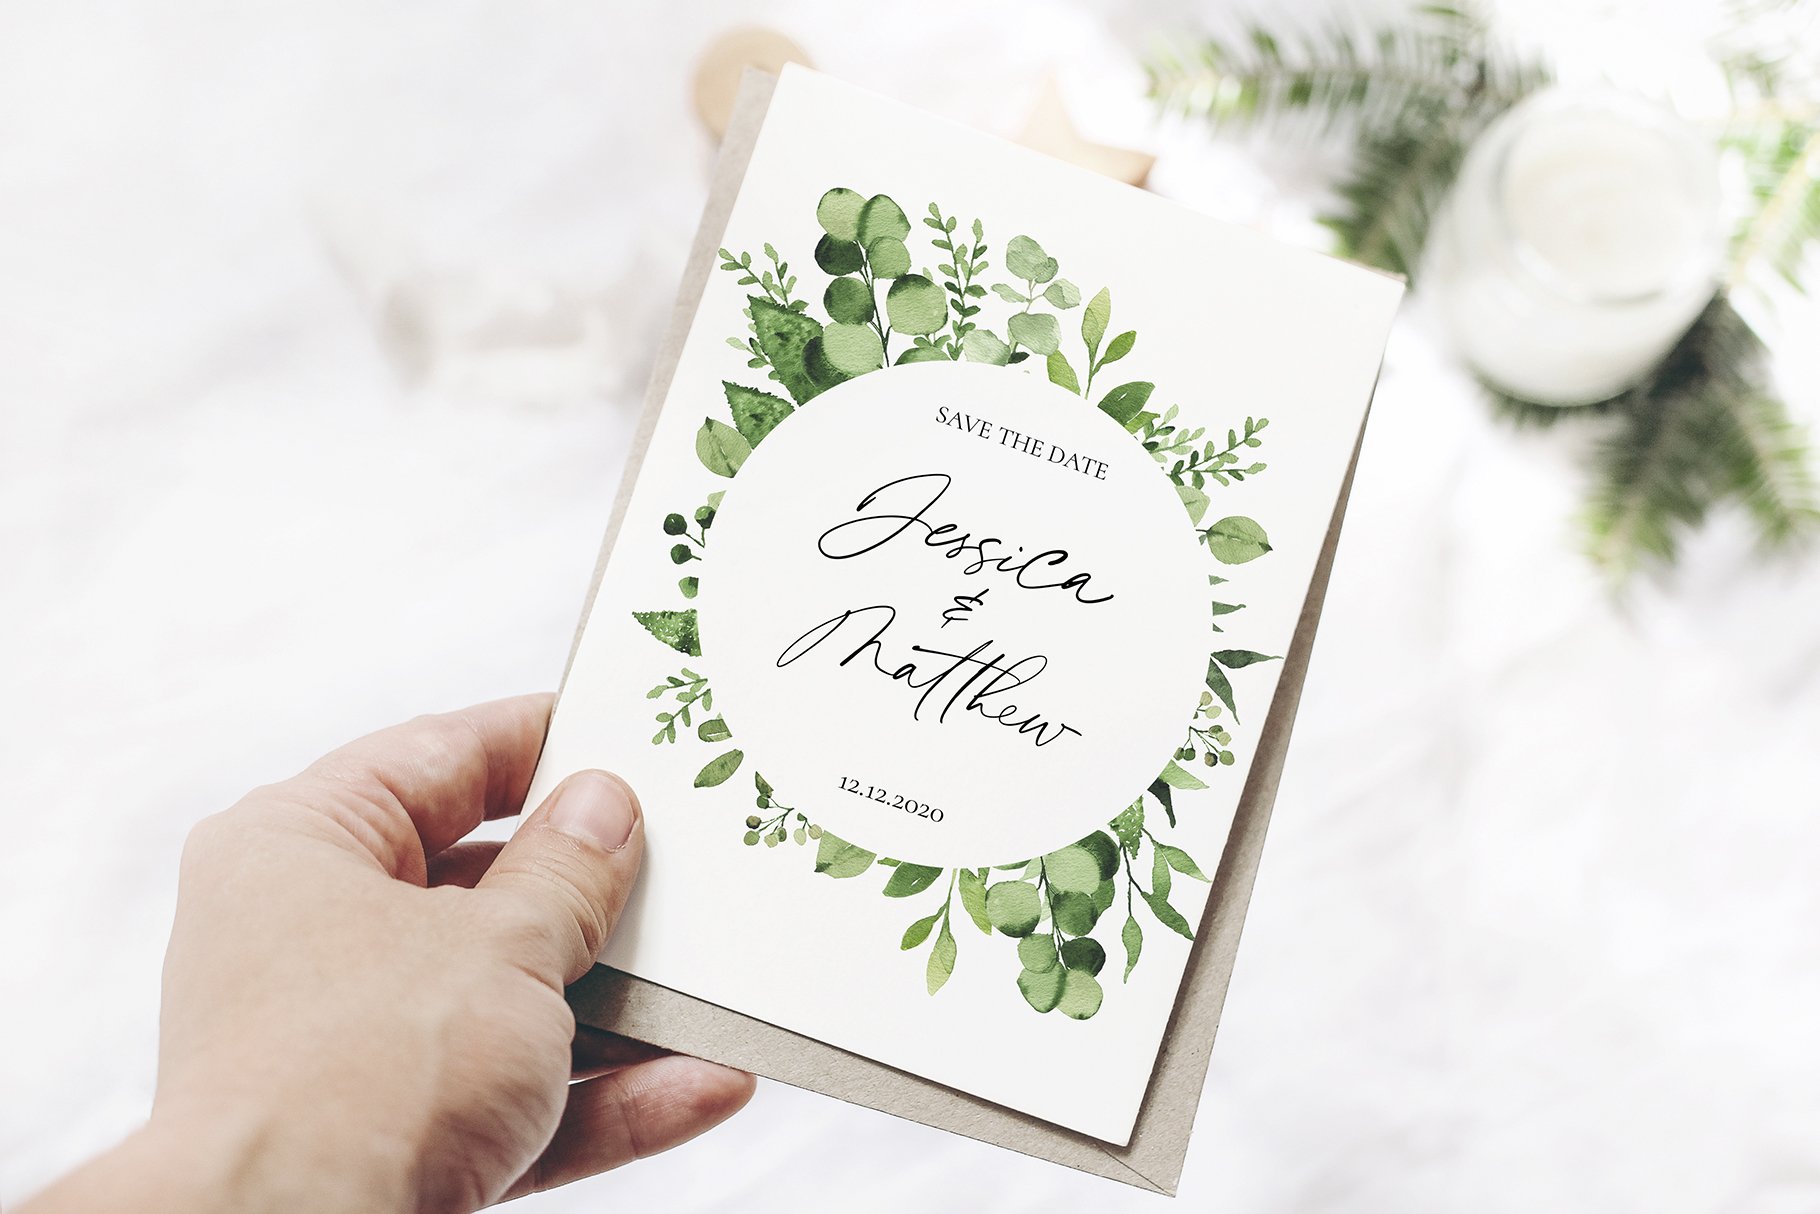 Hand holding a wedding card with greene on it.